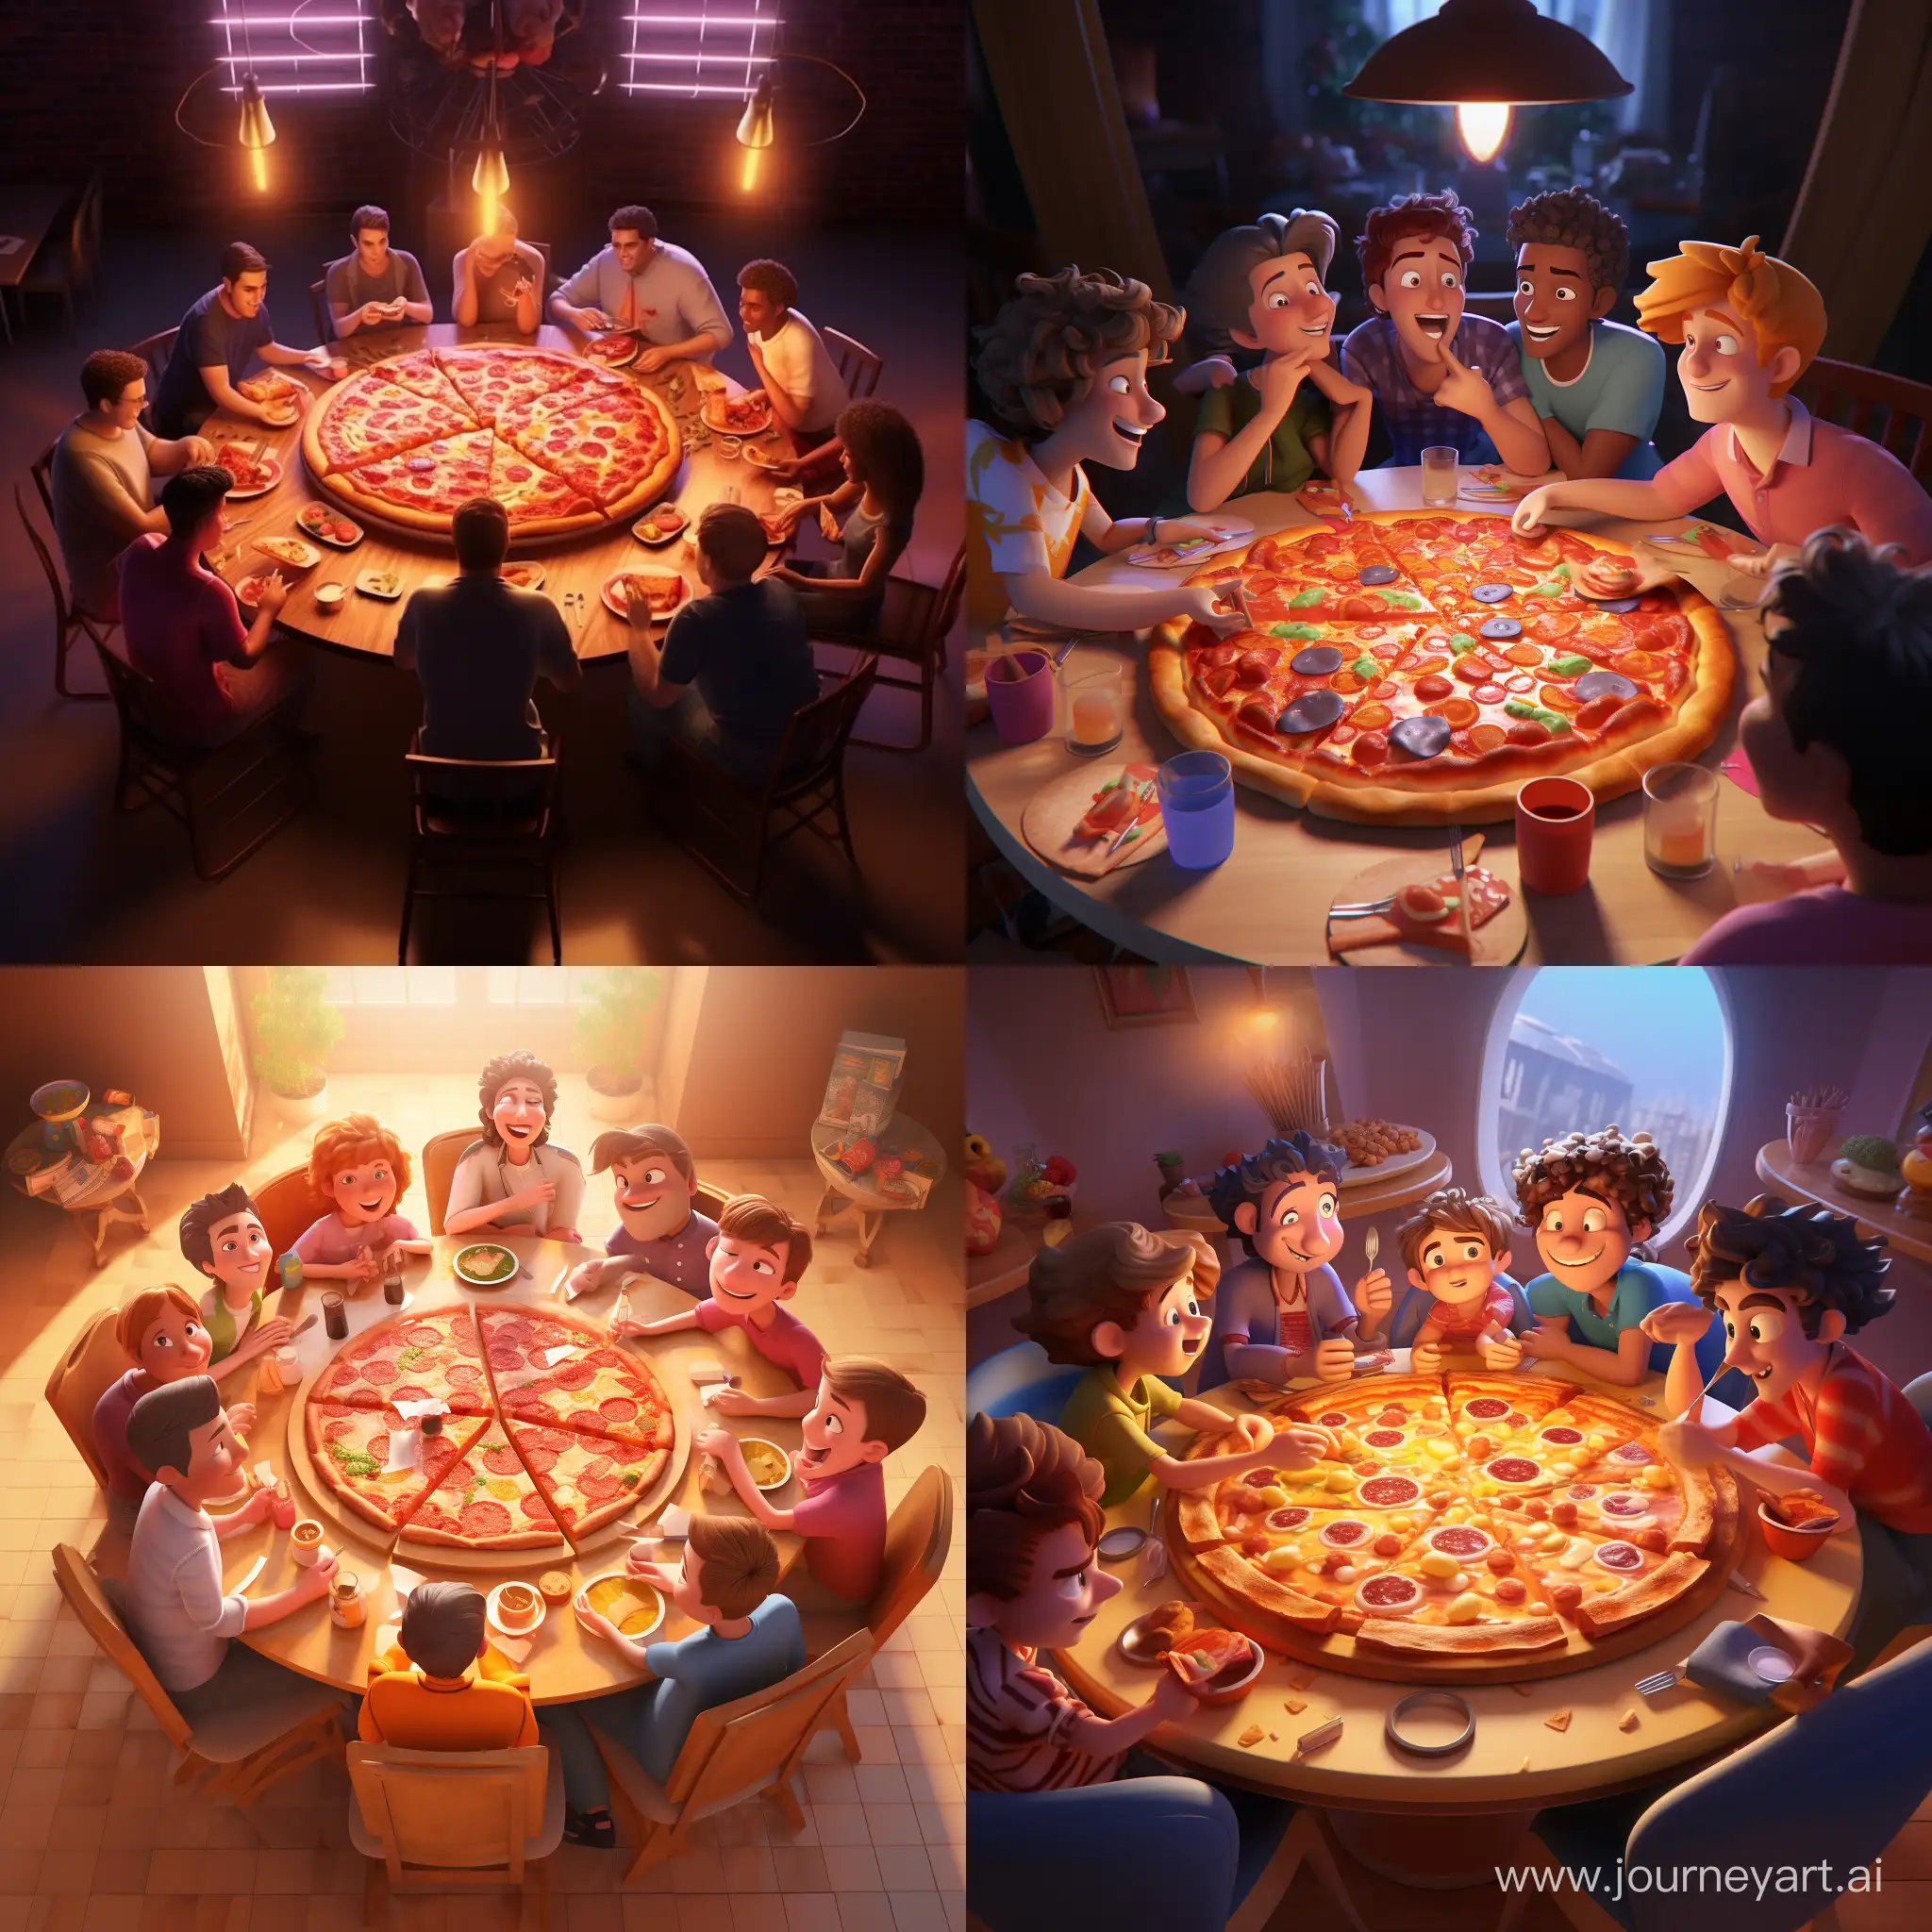 Friends-Enjoying-a-Delicious-Round-Pizza-Feast-in-3D-Animation